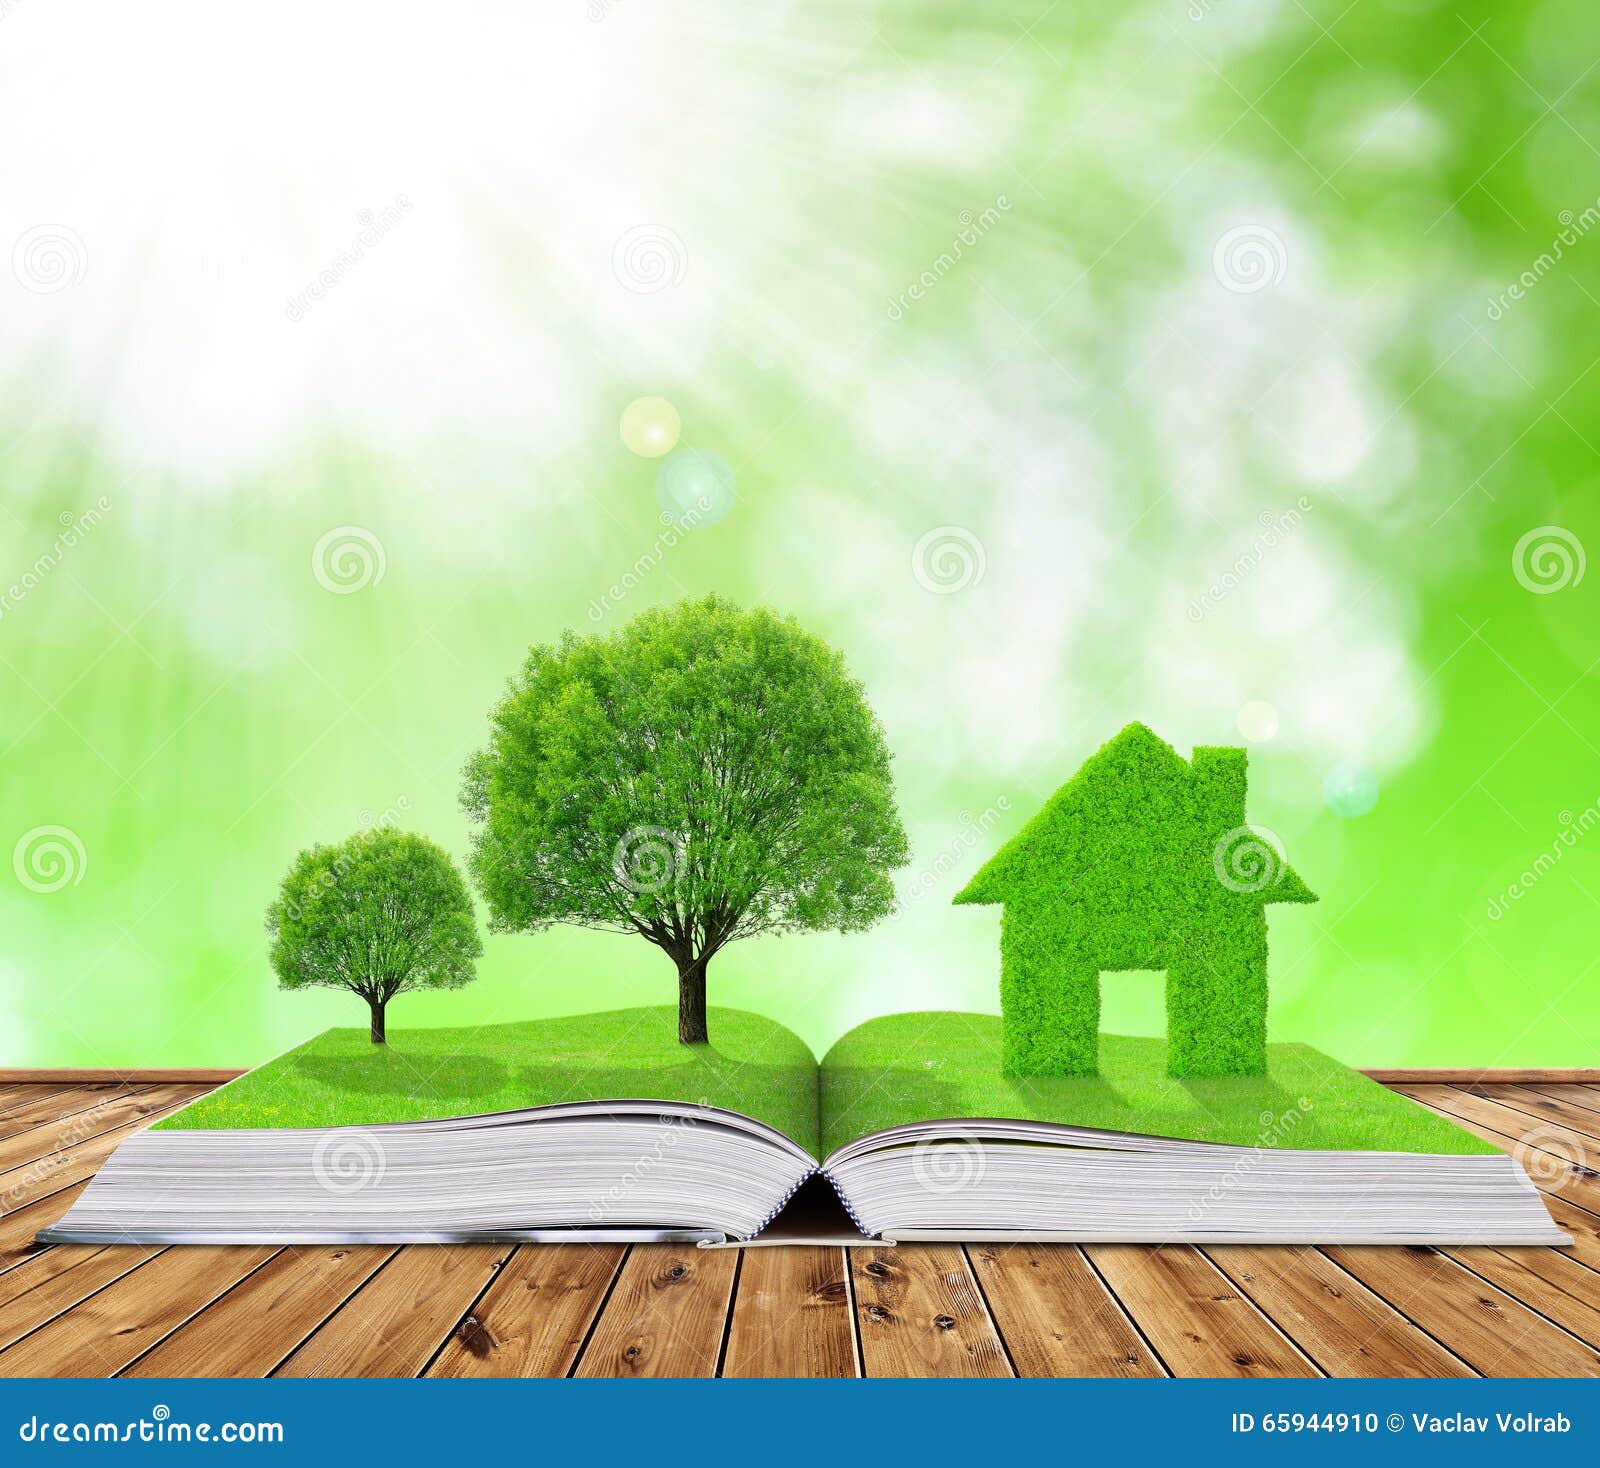 ecological book with trees and house